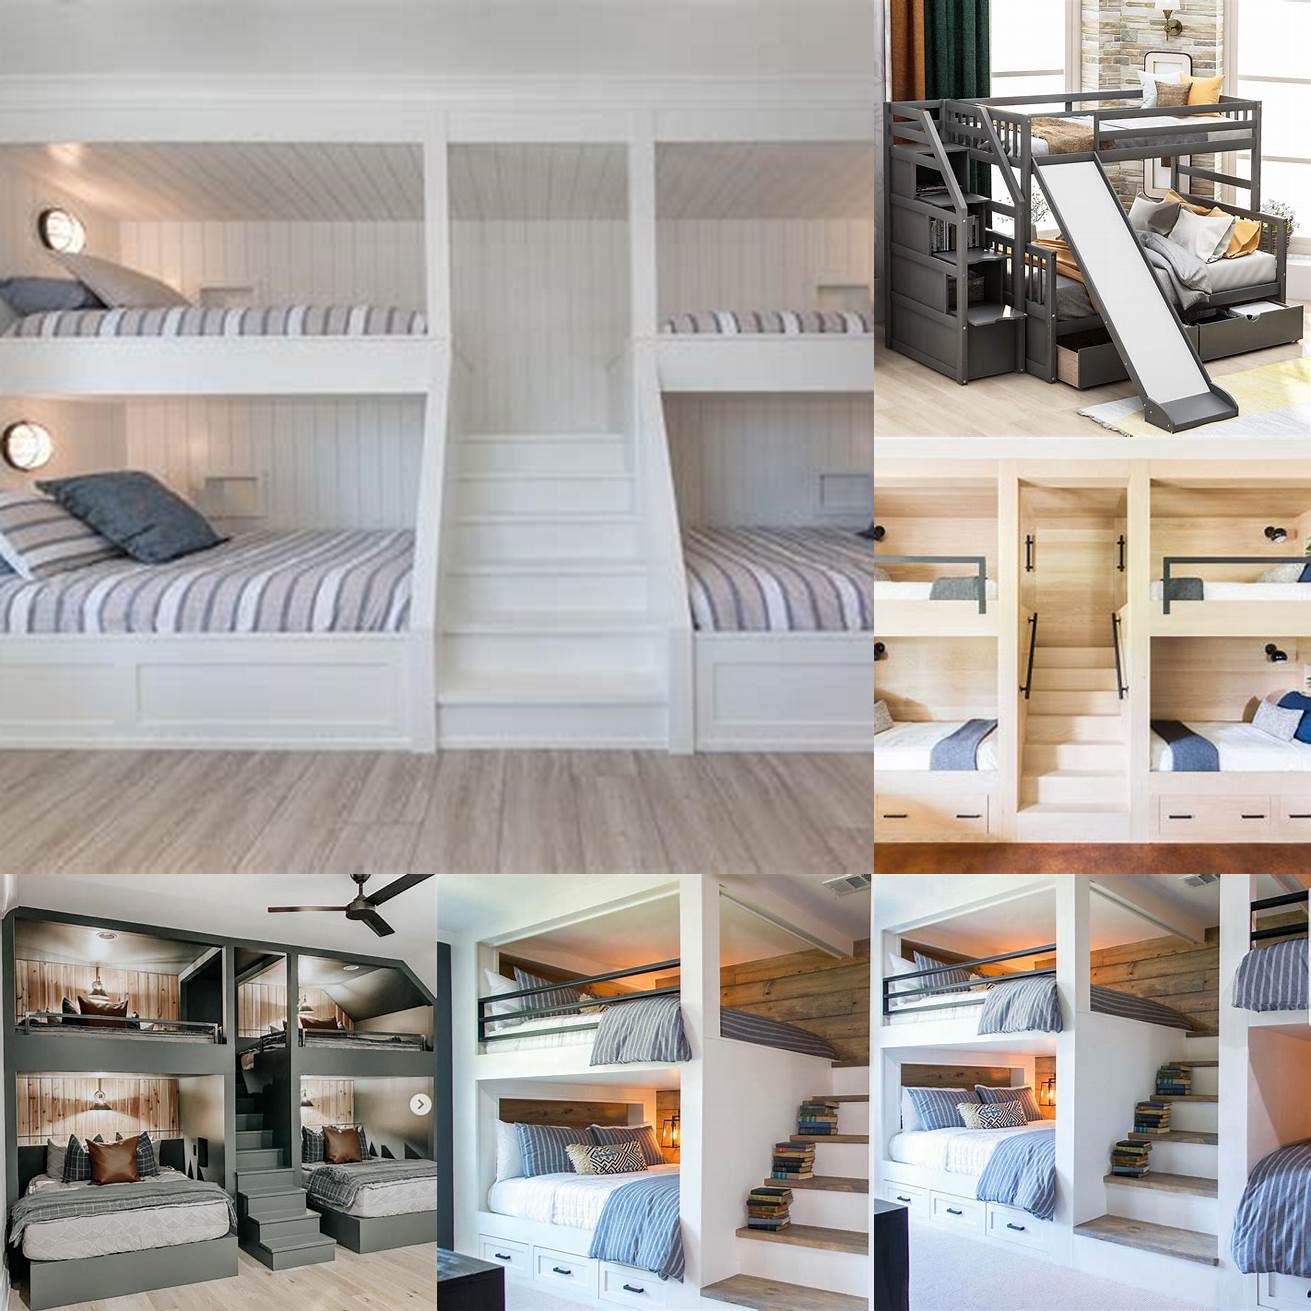 1 Bunk beds with built-in storage